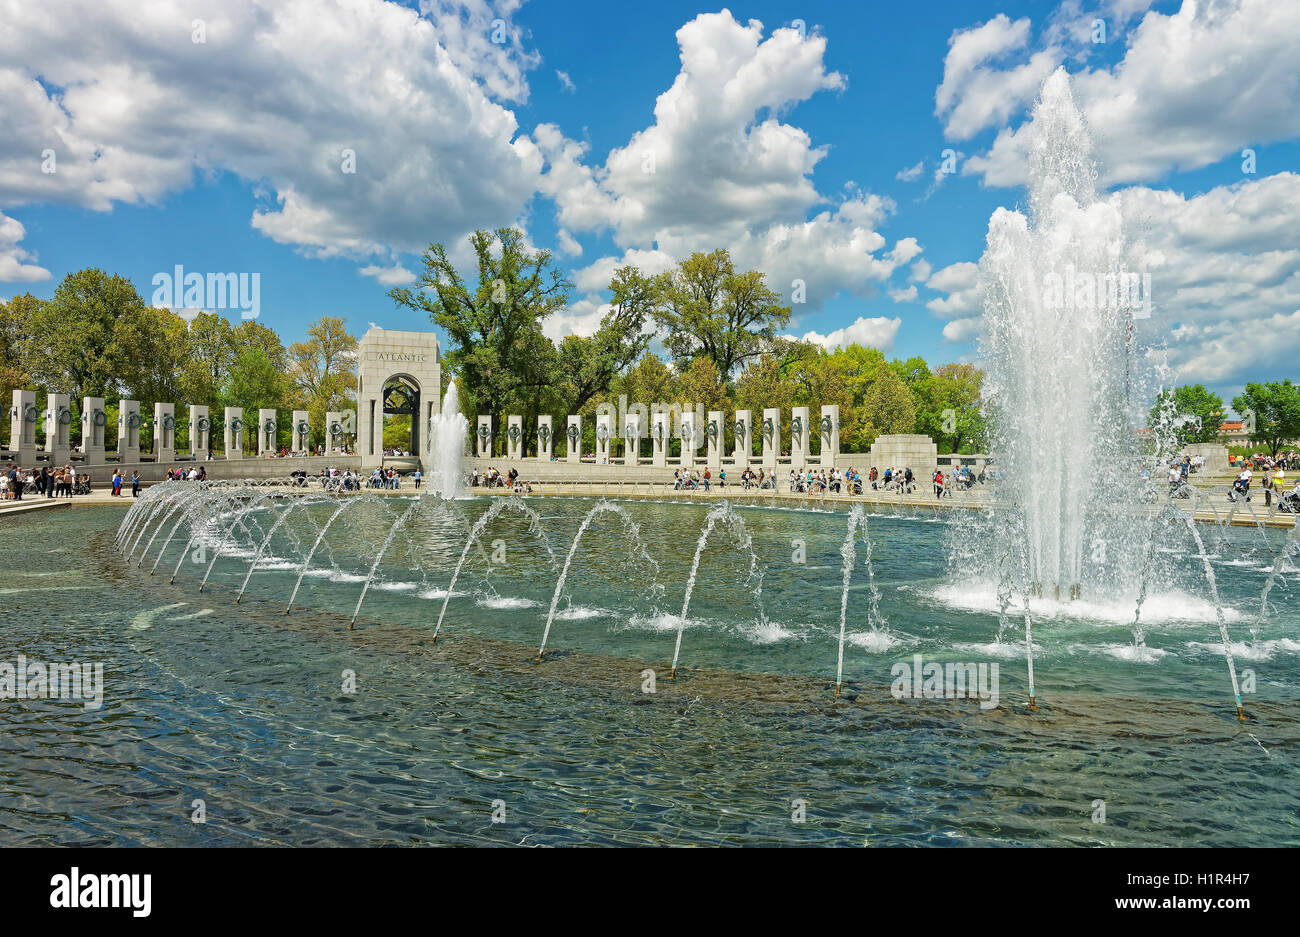 Washington DC, USA - May 2, 2015: World War II Memorial is one of the most visited places in the US. It is a part of the National Mall and locates near Lincoln Memorial and Washington monument. Stock Photo